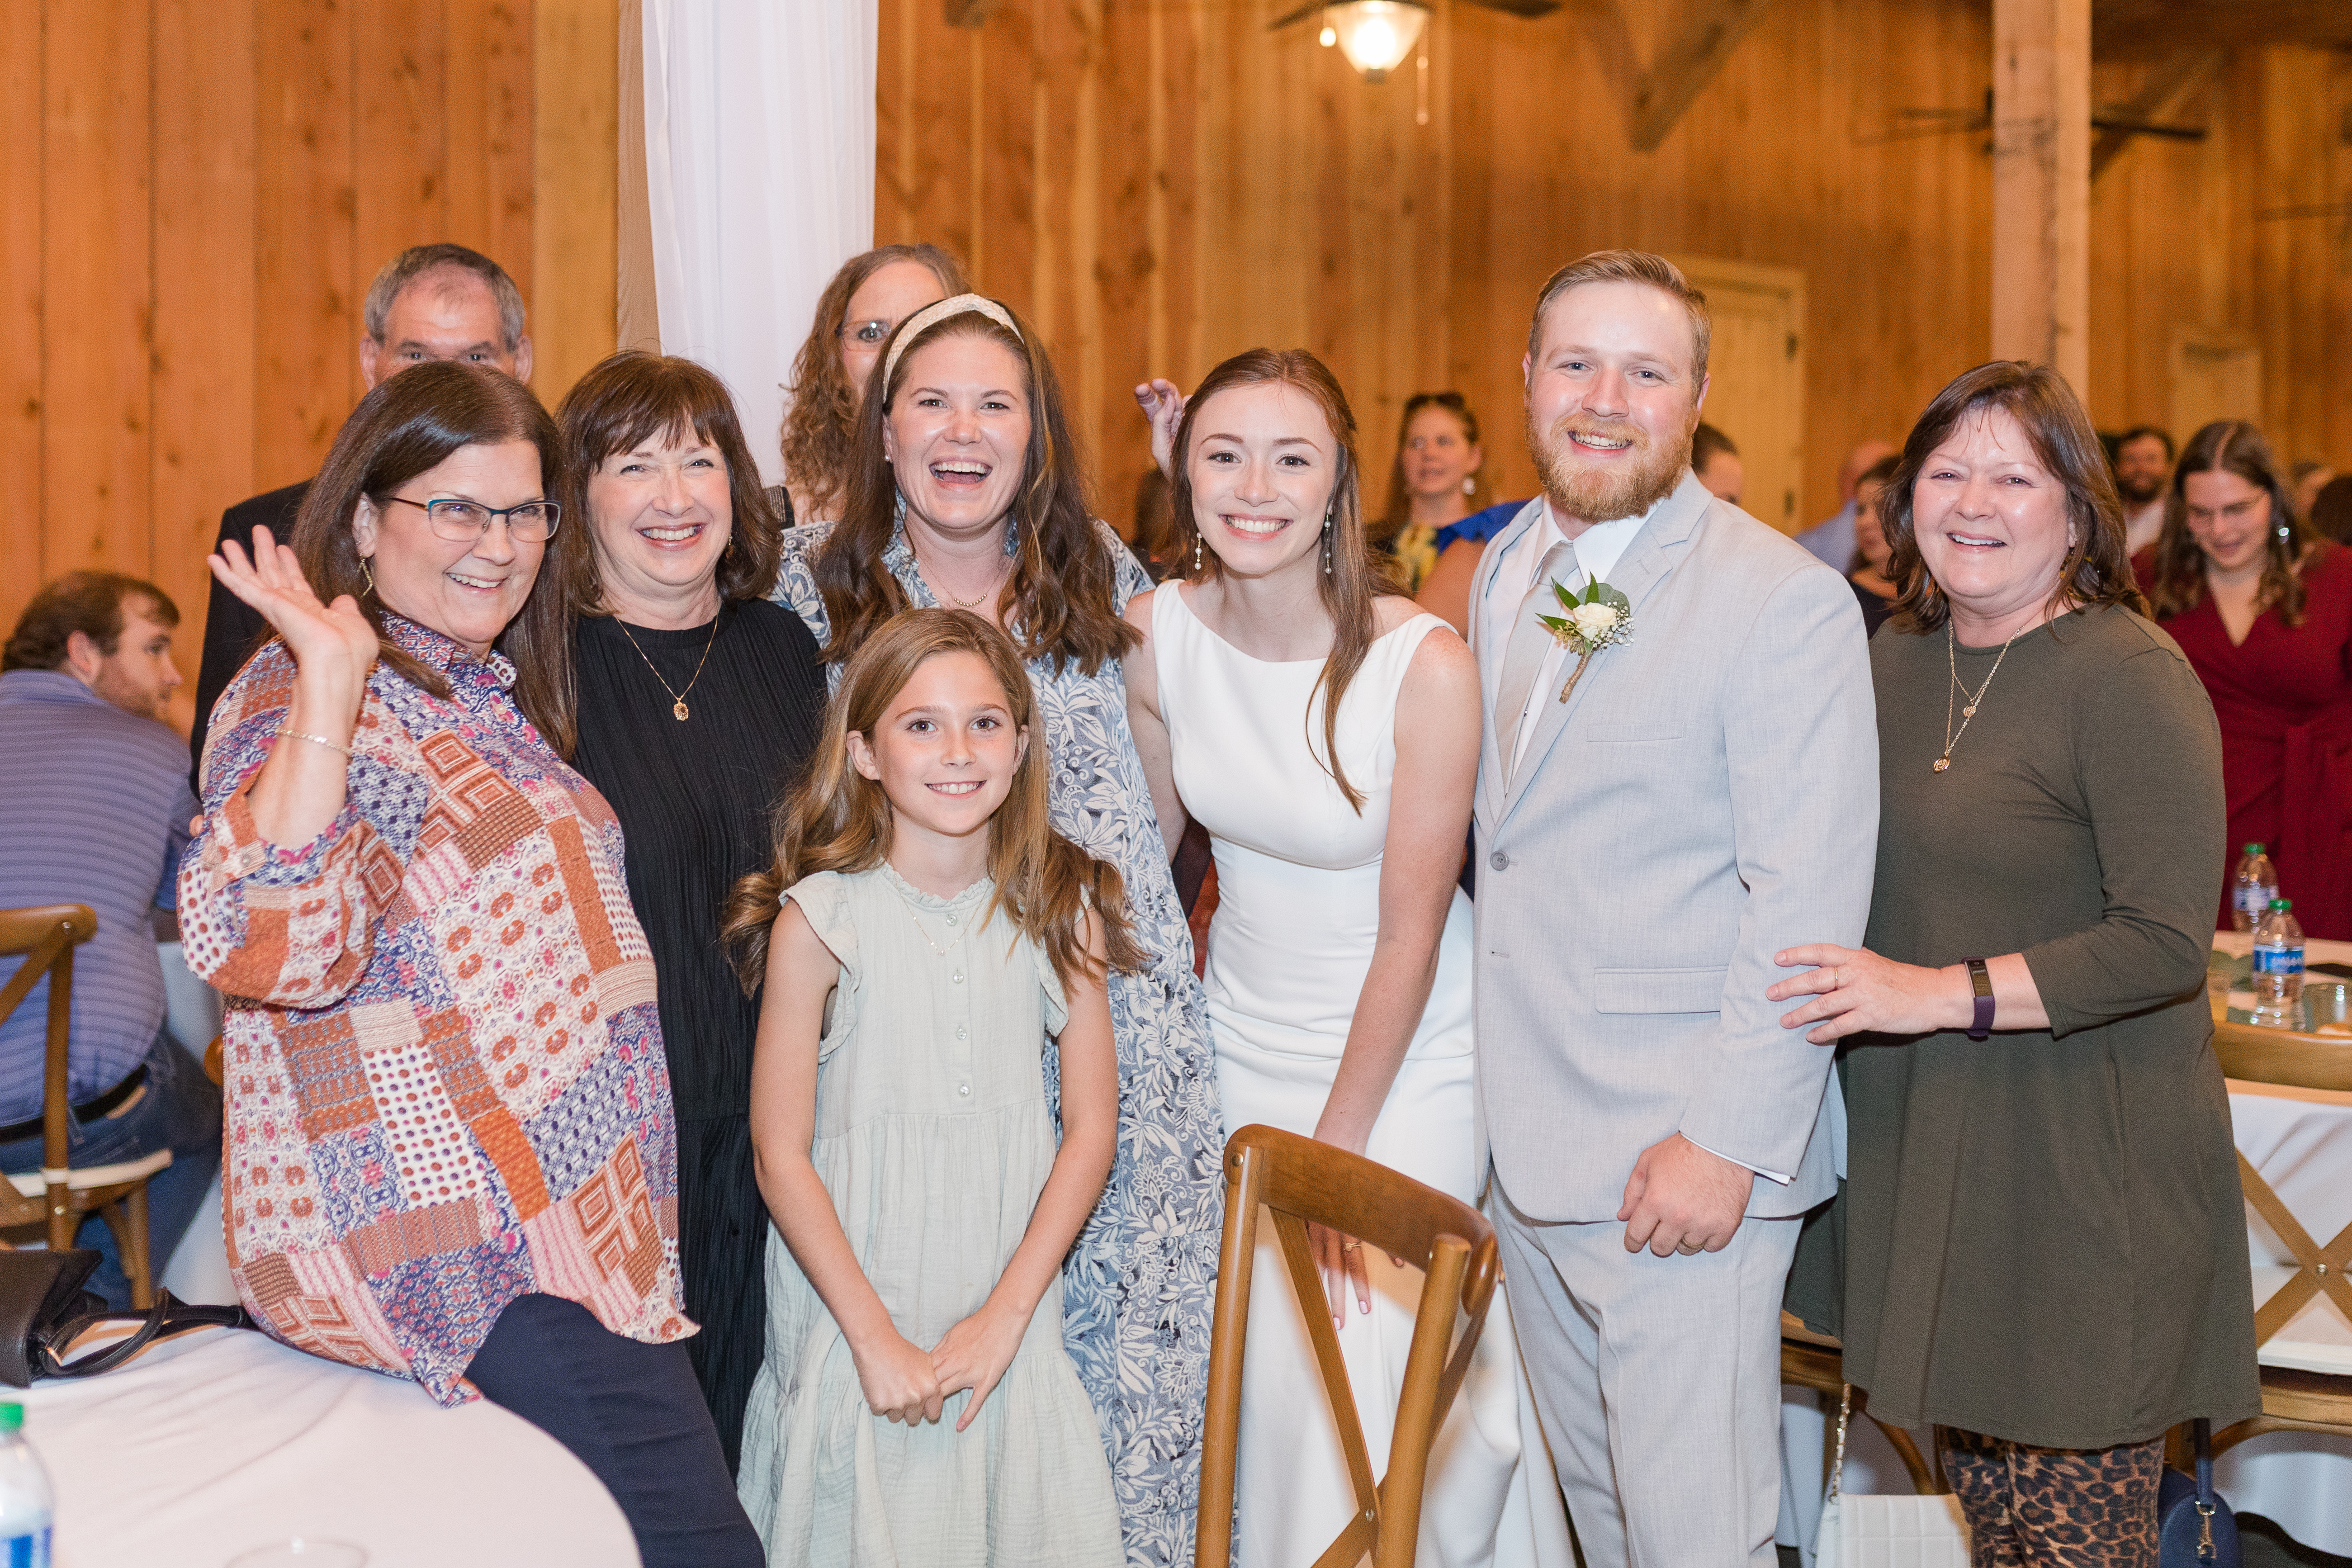 Image of Sydney with Weyerhaeuser co-workers at her wedding.